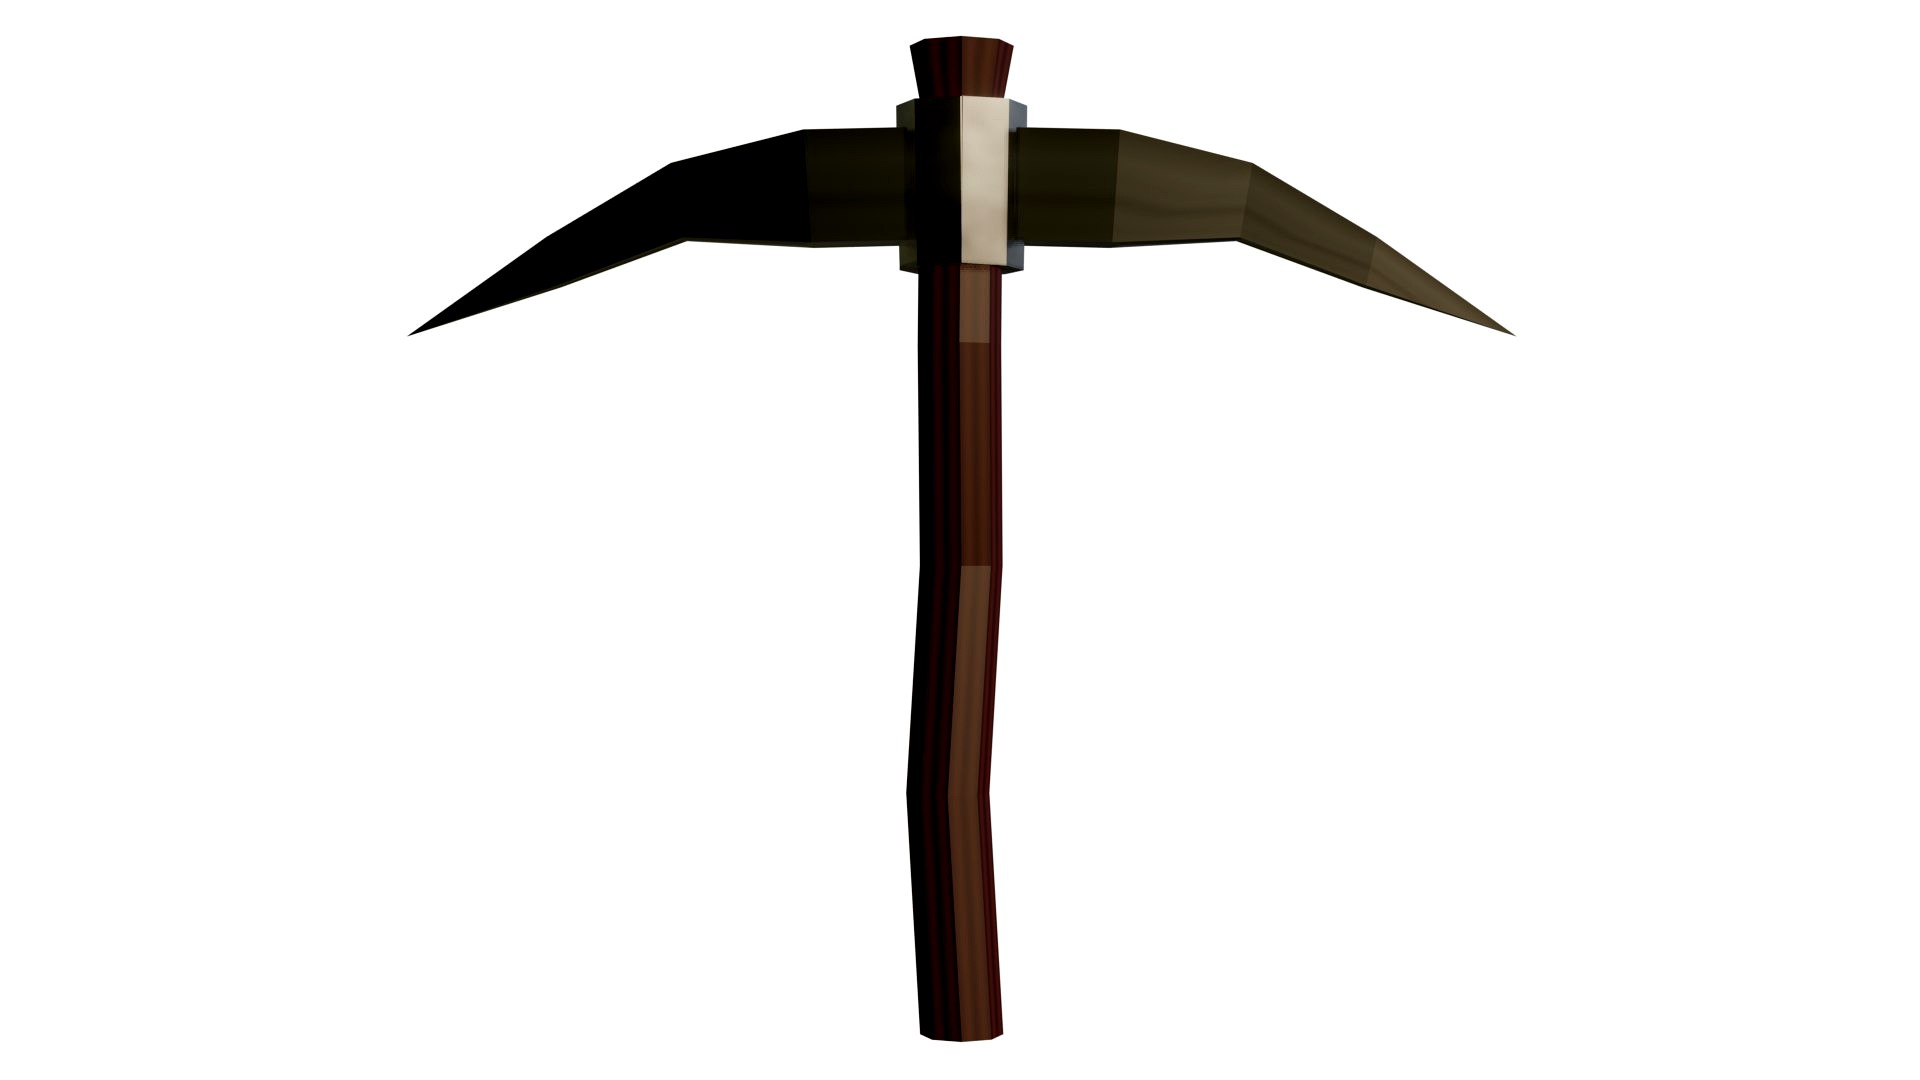 low-poly pickaxe